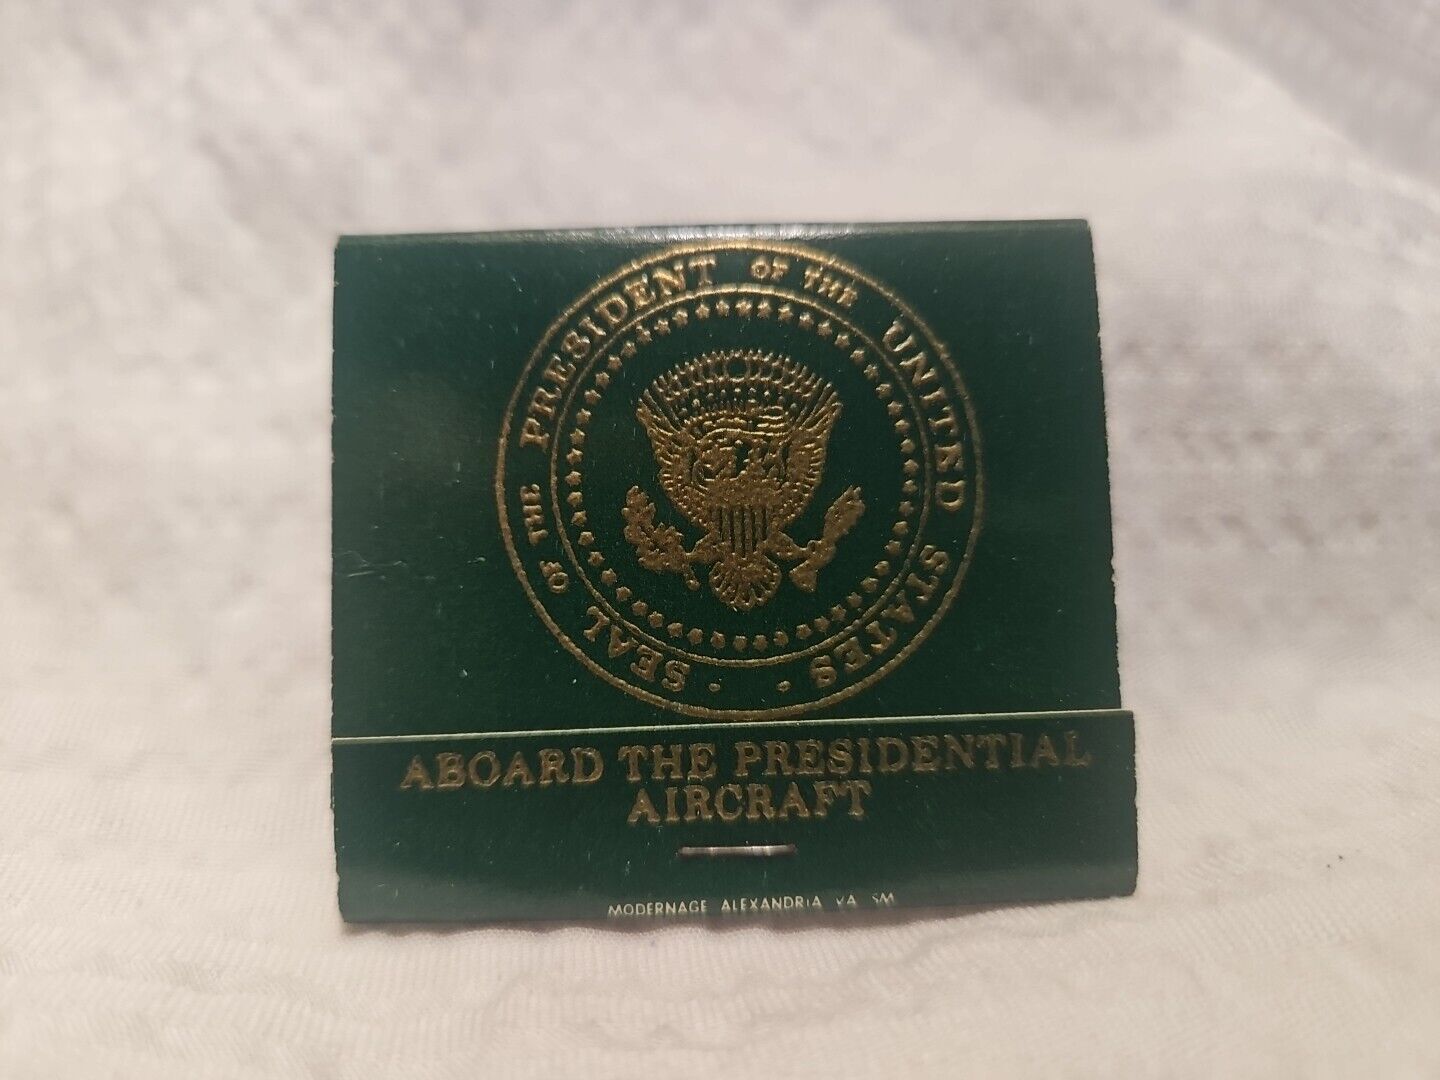 NEW Vintage \'70s AIR FORCE ONE 1 MATCHBOOK Matches PRESIDENT USA Aircraft GREEN